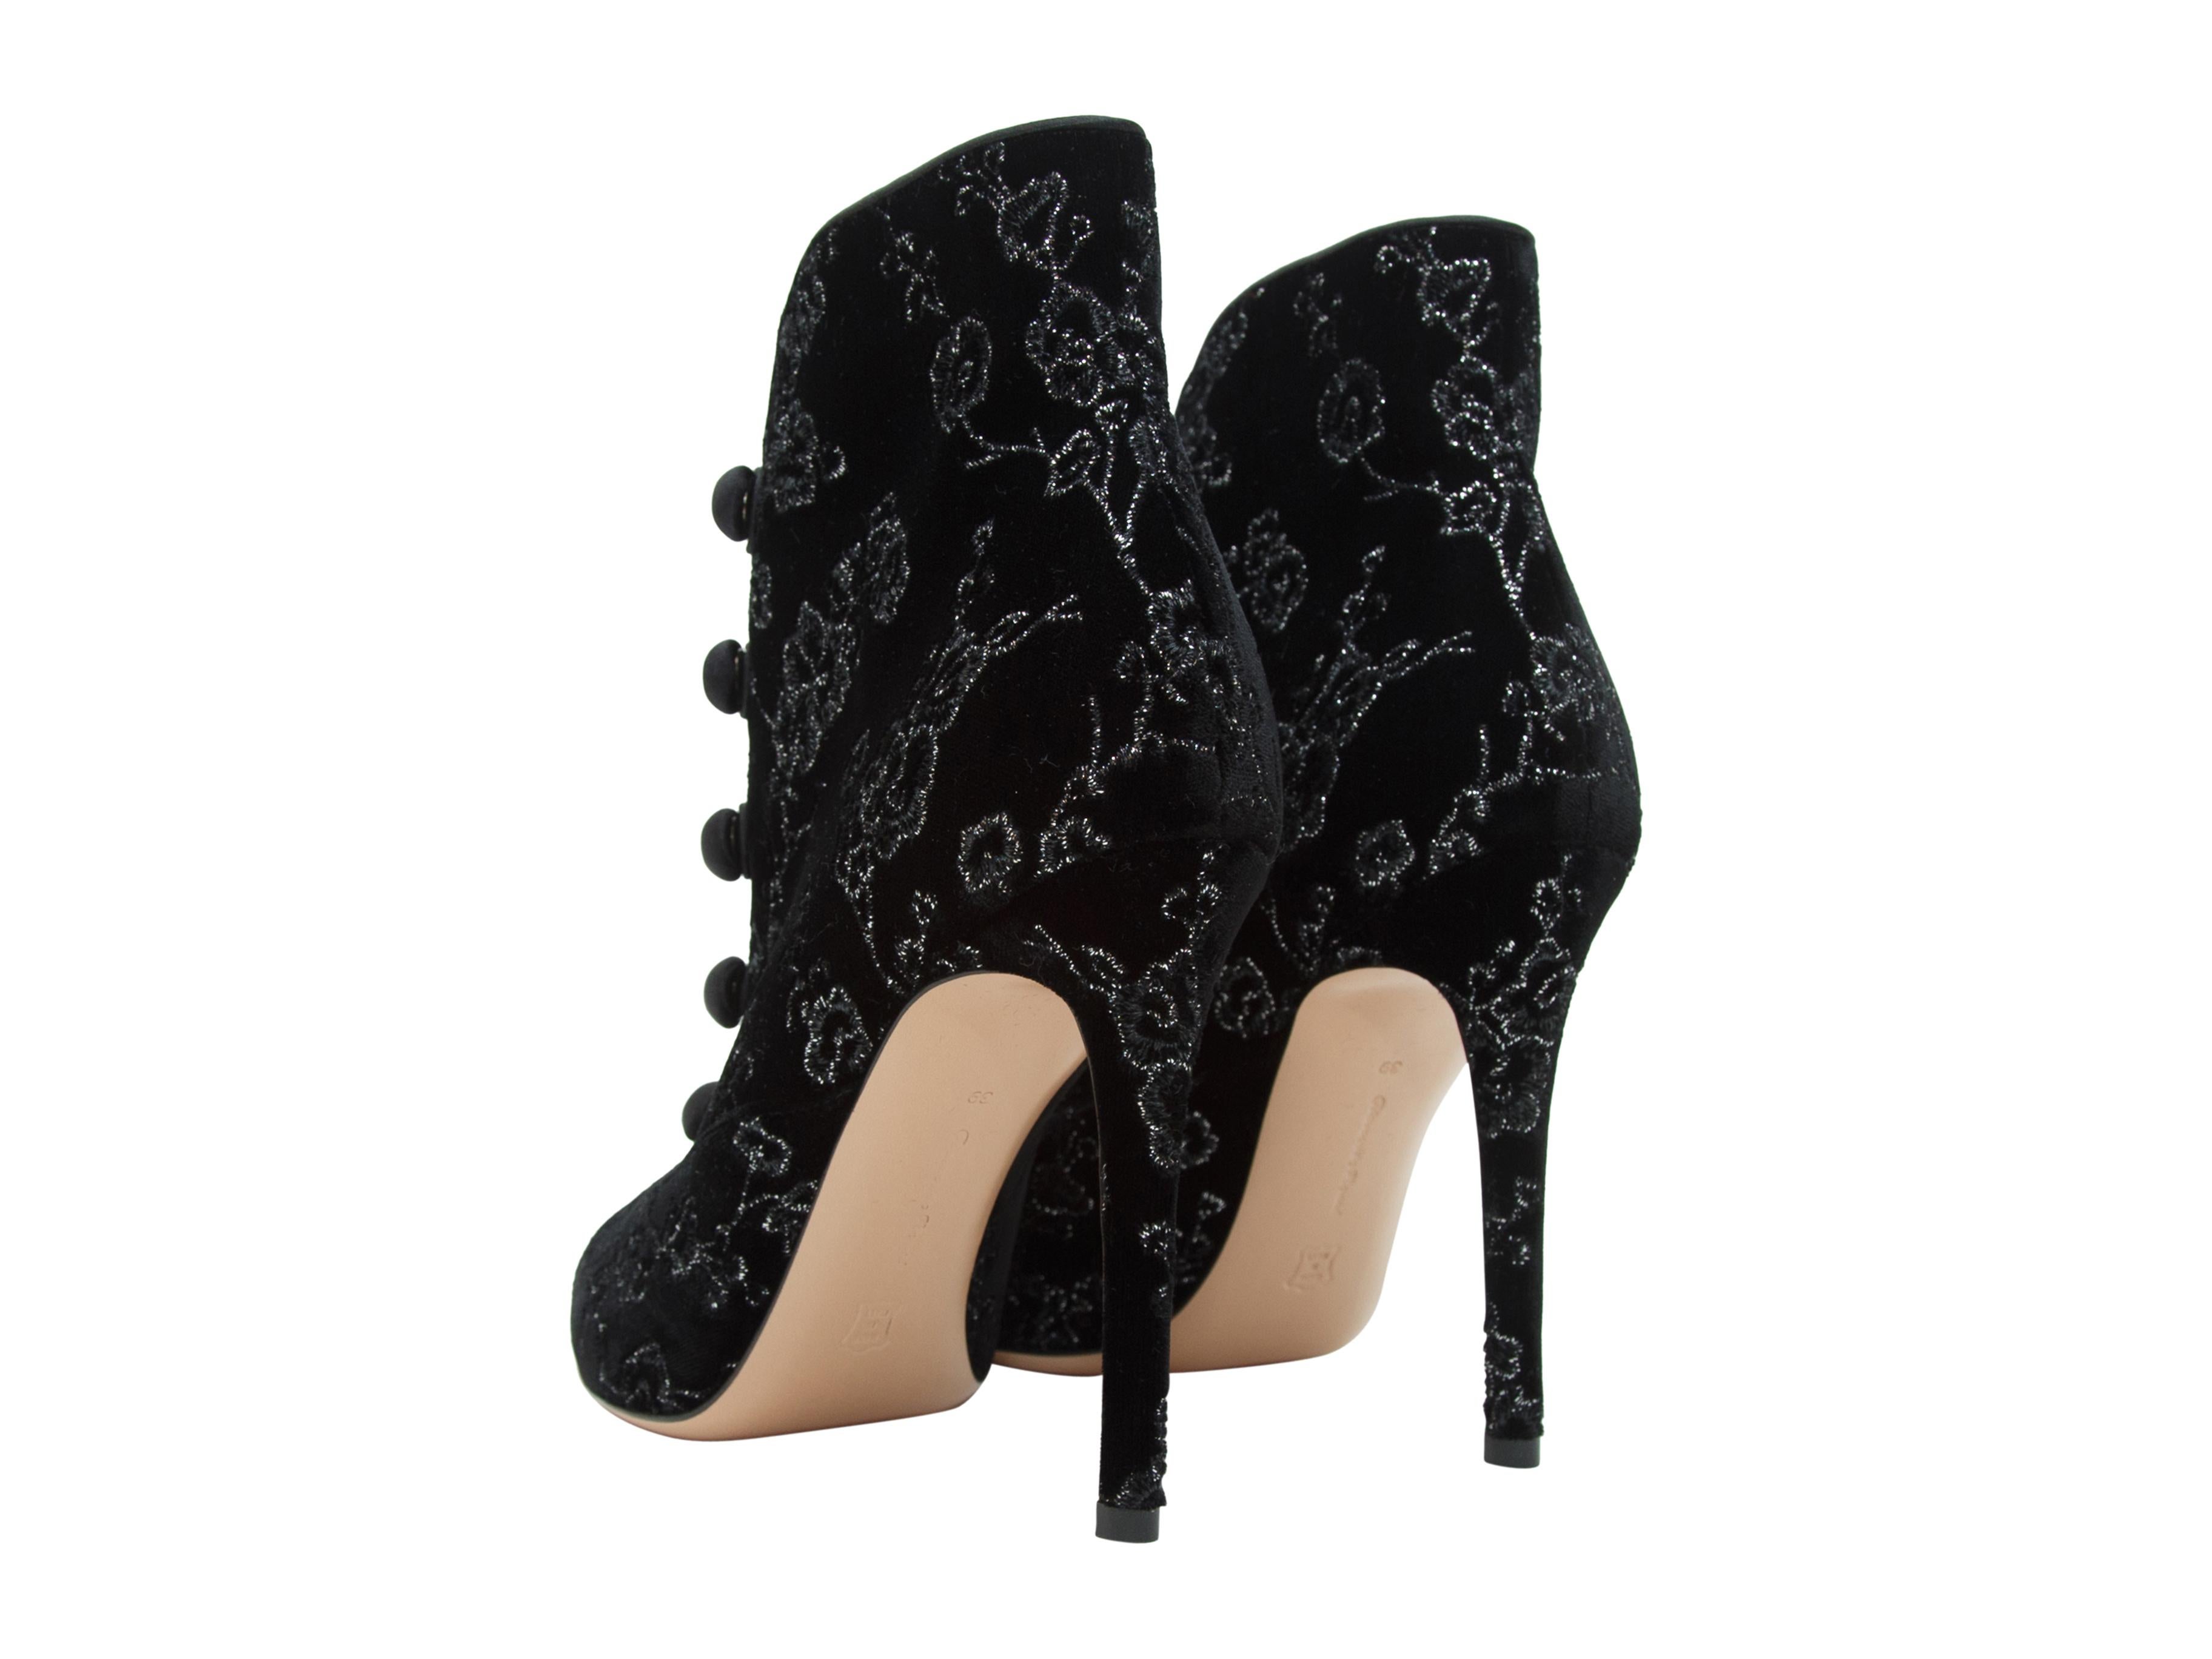 Women's Gianvito Rossi Black & Silver Floral Suede Ankle Boots